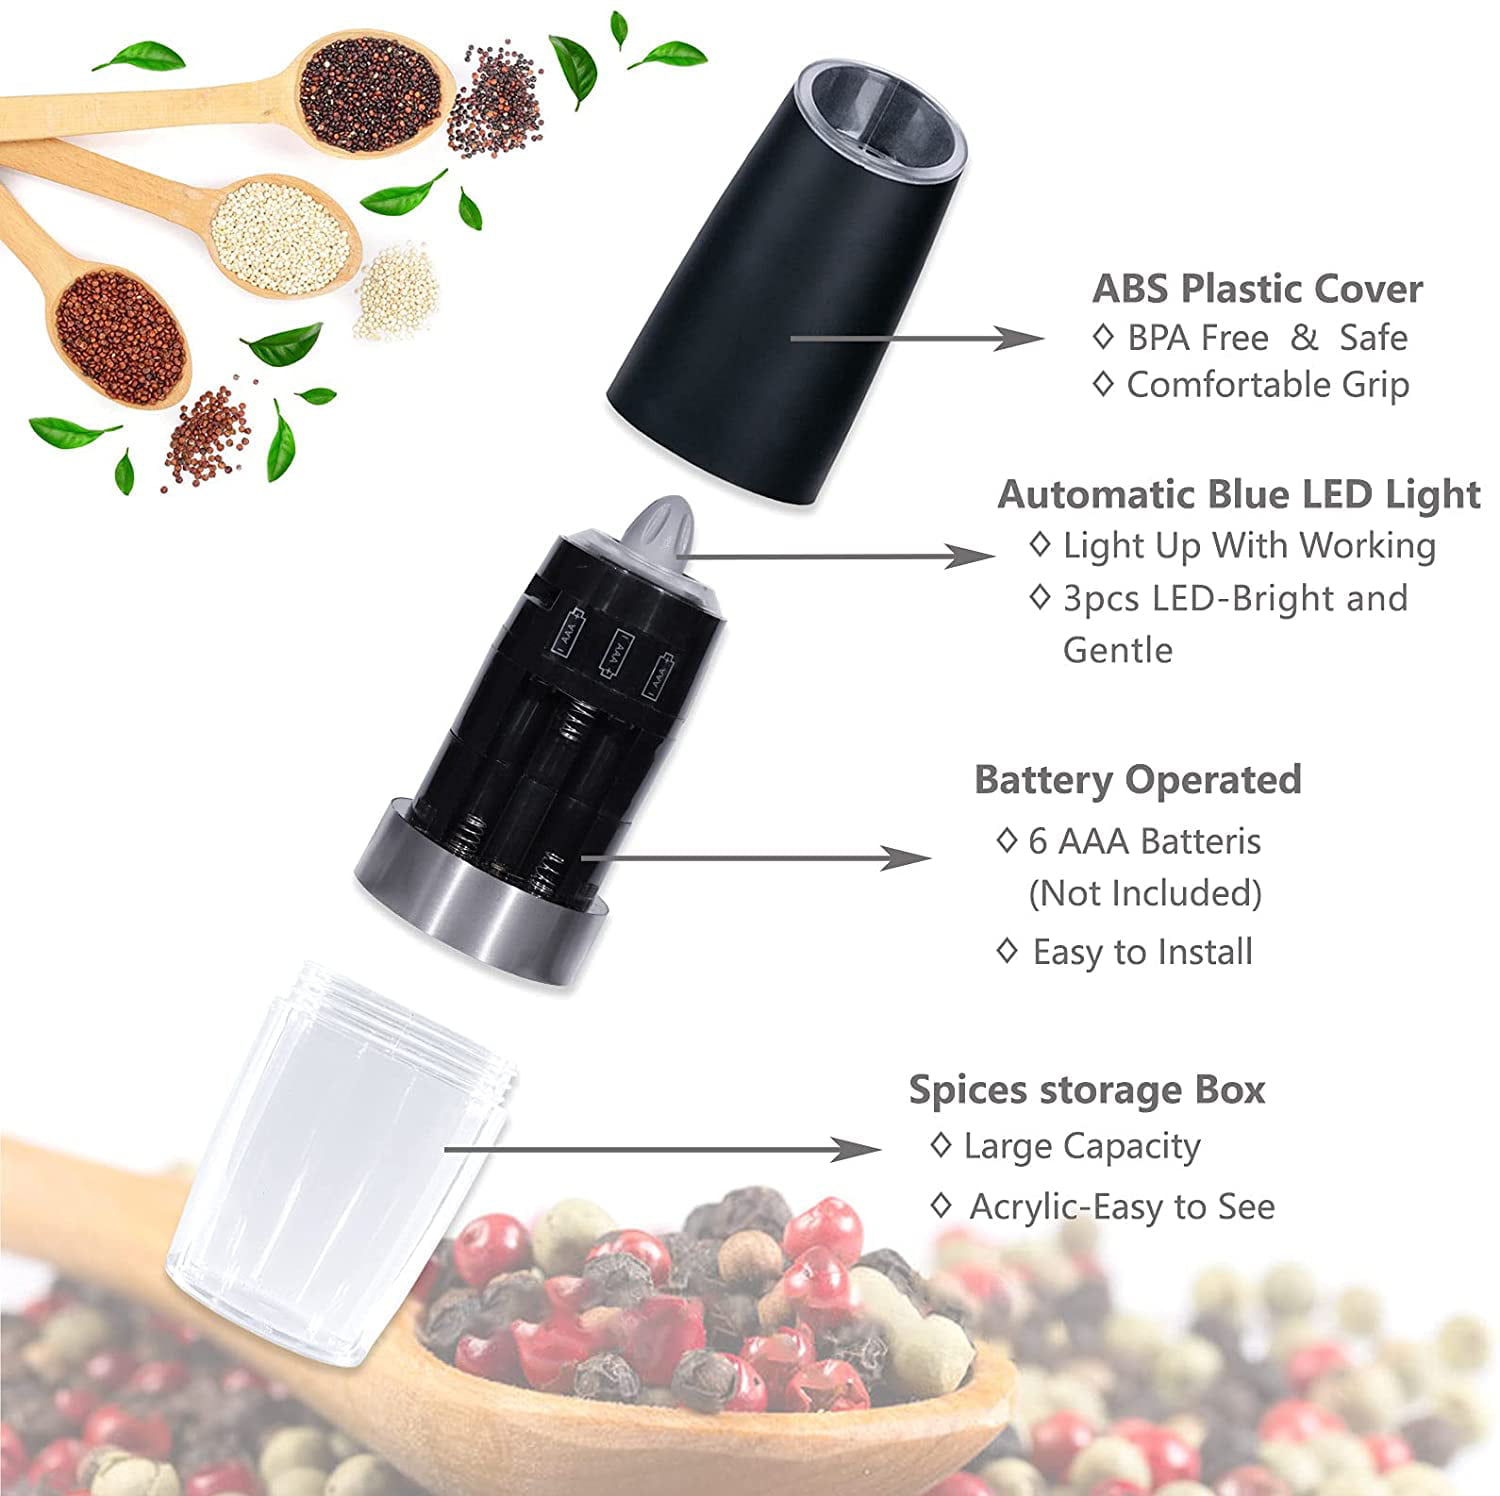 Sangcon 2 in 1 Electric Salt and Pepper Grinder Set Shaker - Automatic Salt and Pepper Grinder Mill Dual Combo, Battery Powered One-Handed Operation